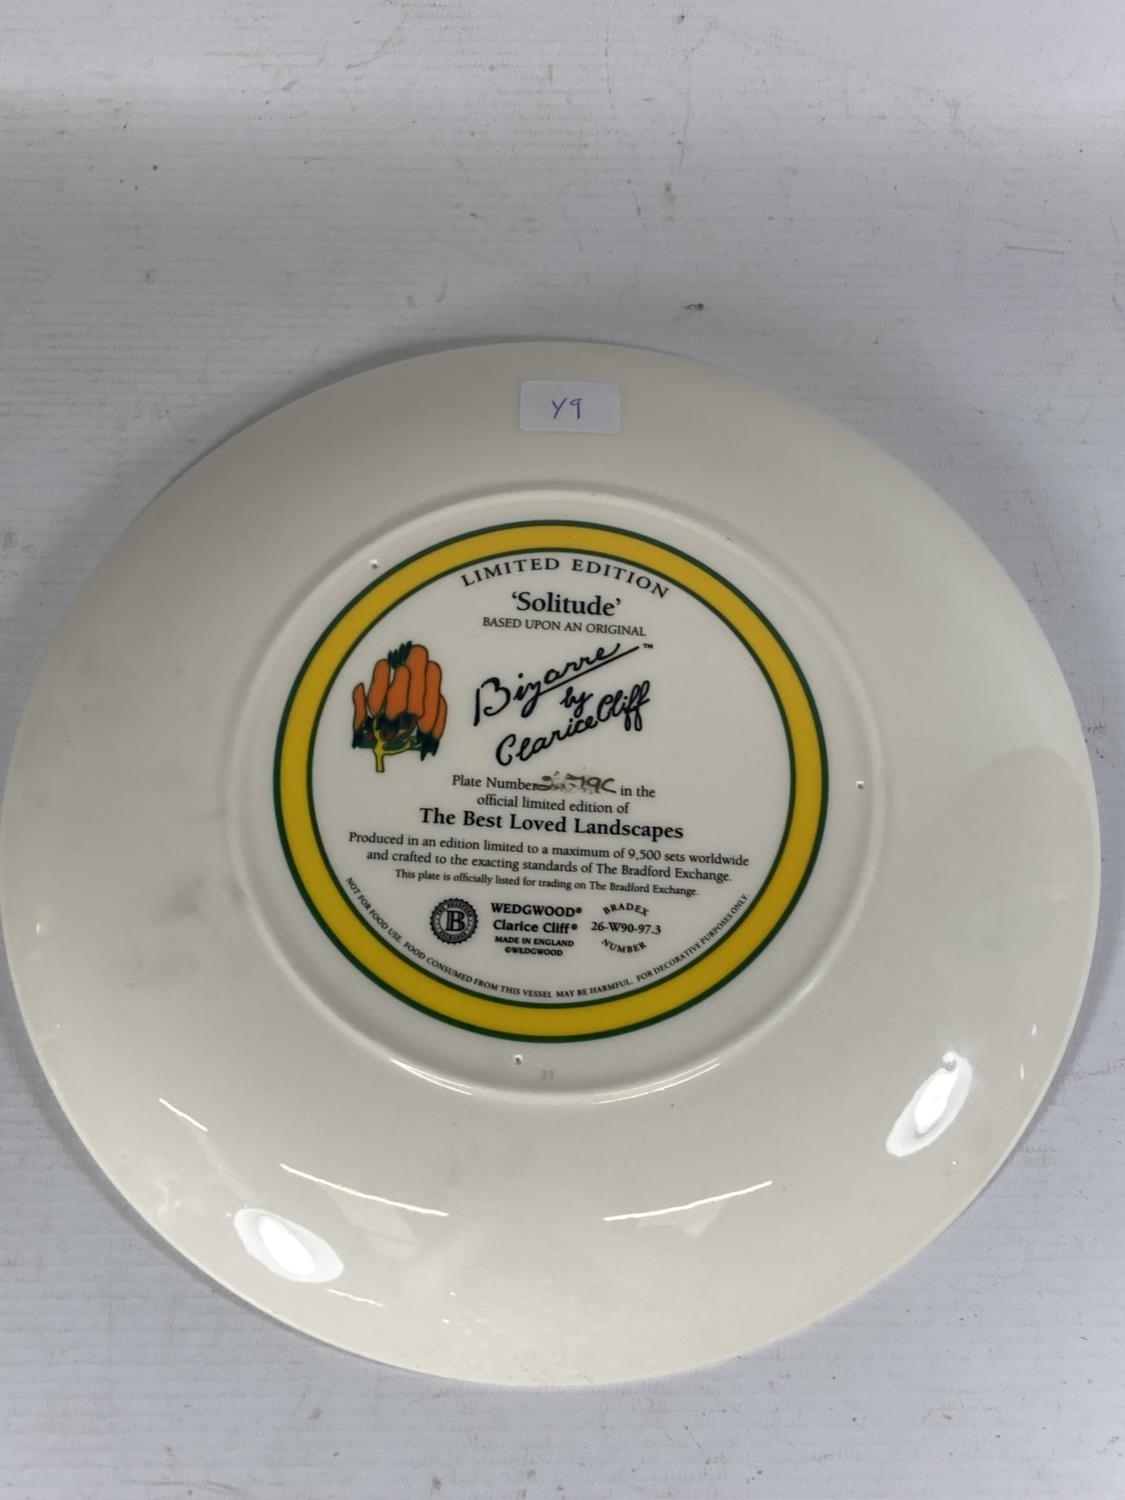 Pre Owned Clarice Cliff Limited Edition Plate - Image 2 of 5